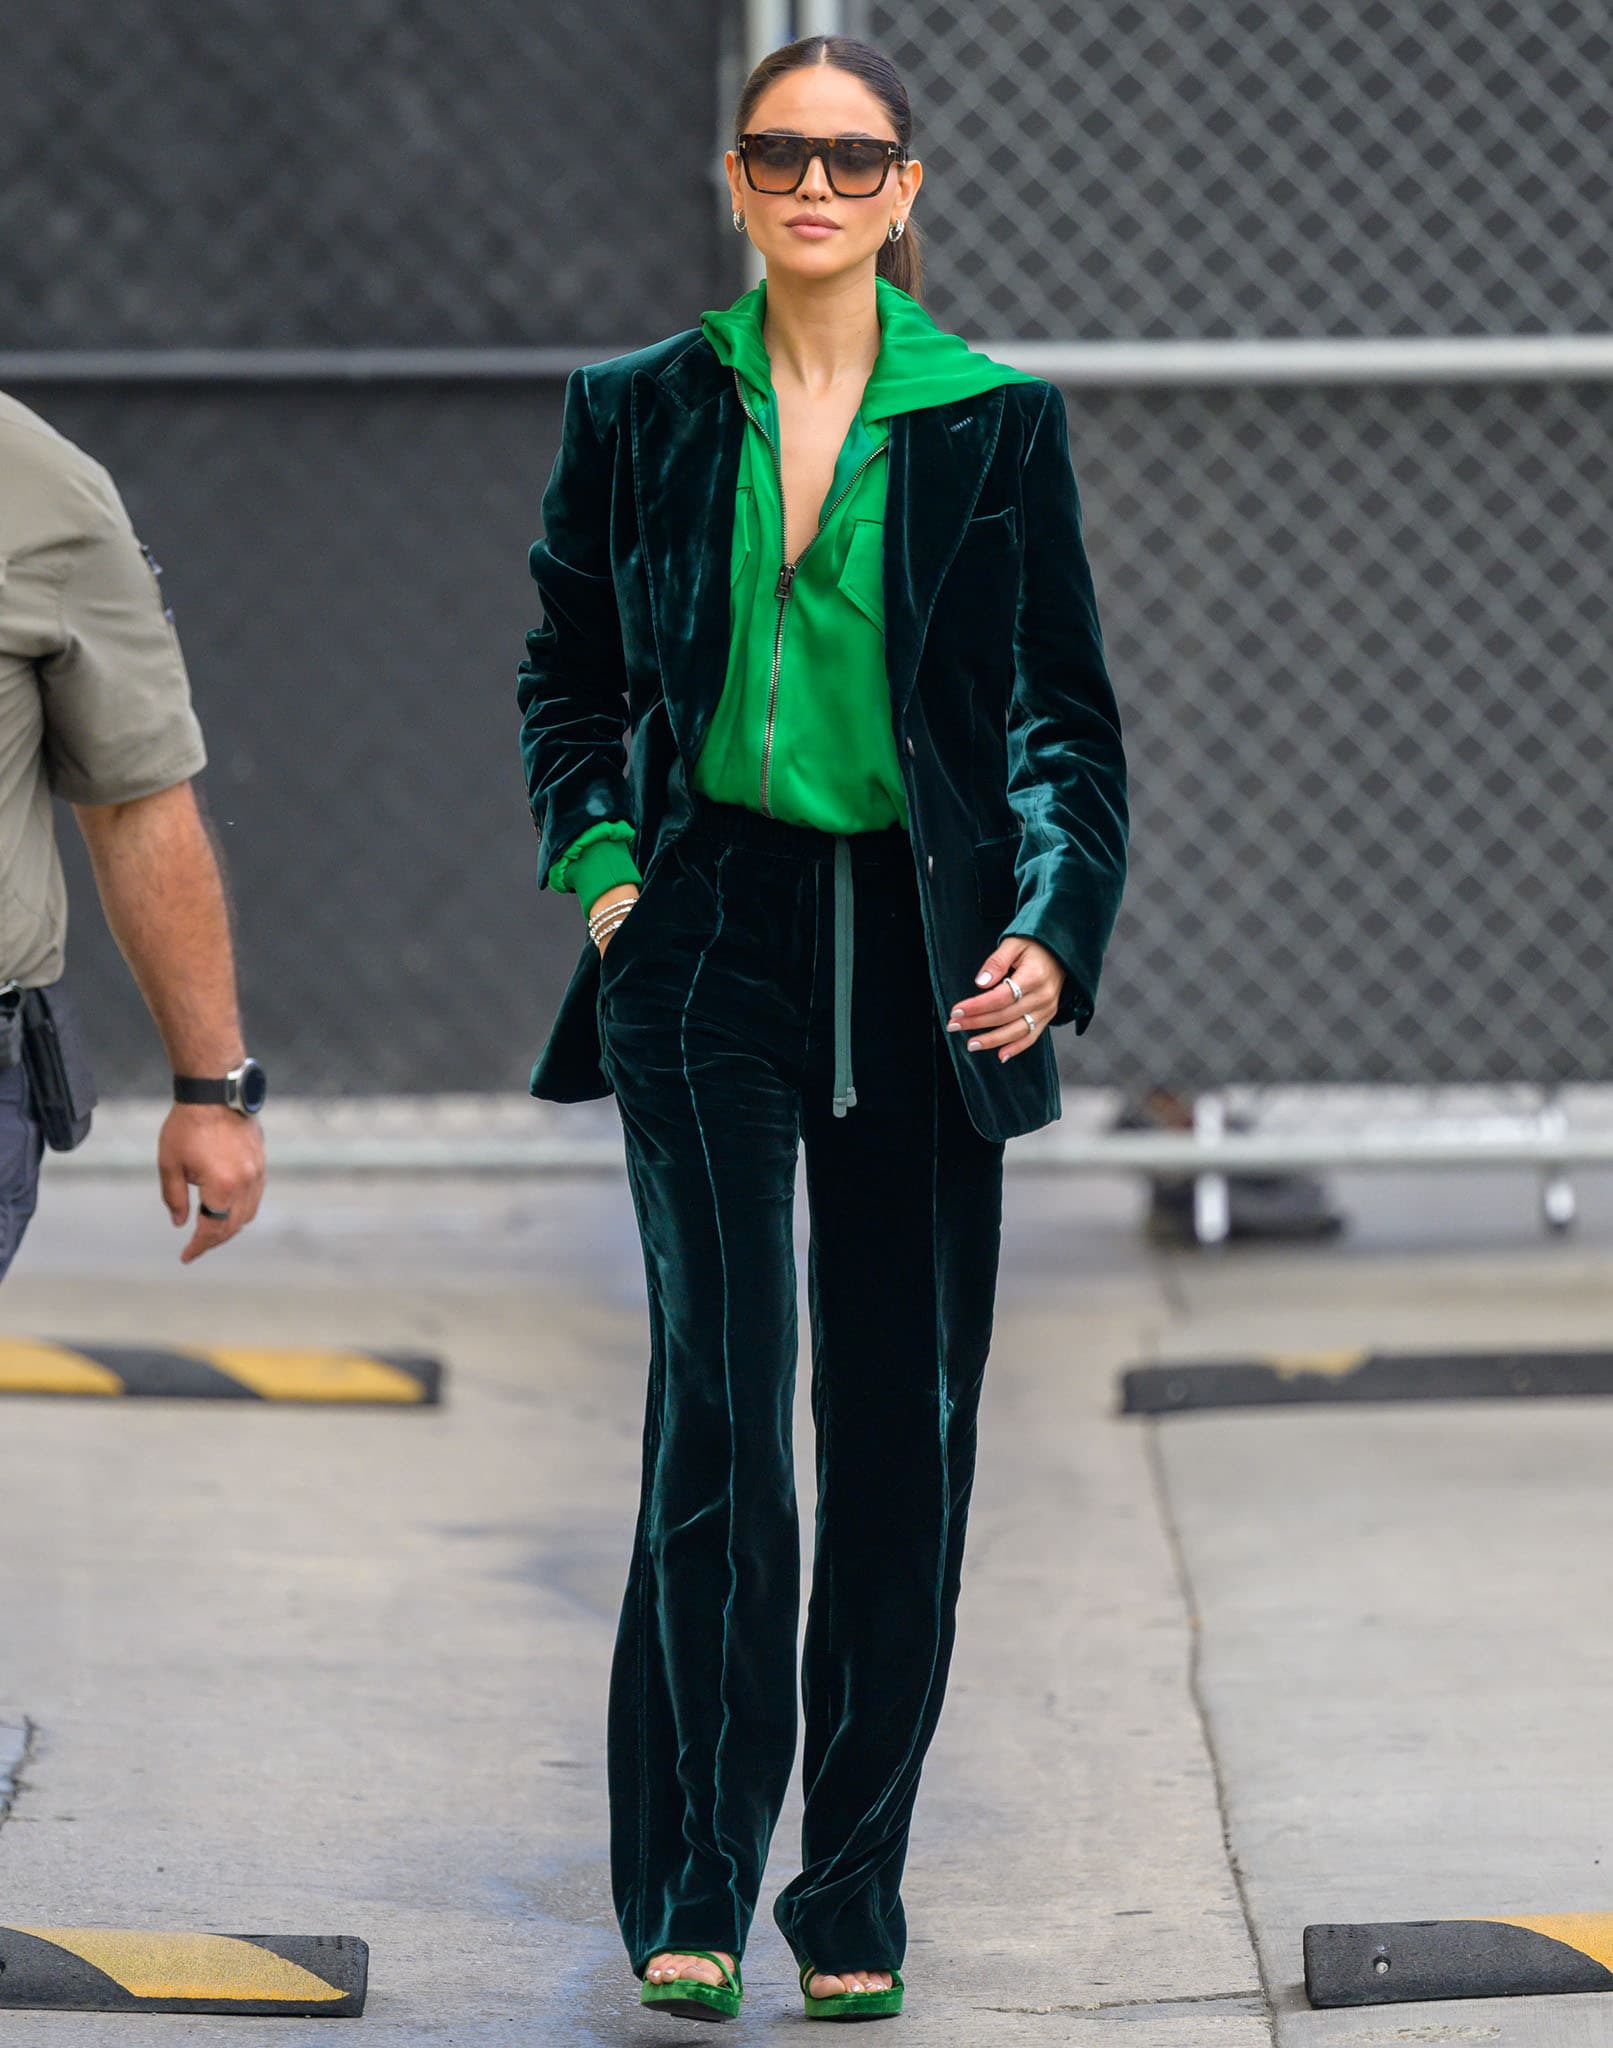 Eiza Gonzalez embraces monochromatic trend in a green velvet suit, a neon green hoodie, and a pair of green velvet sandals